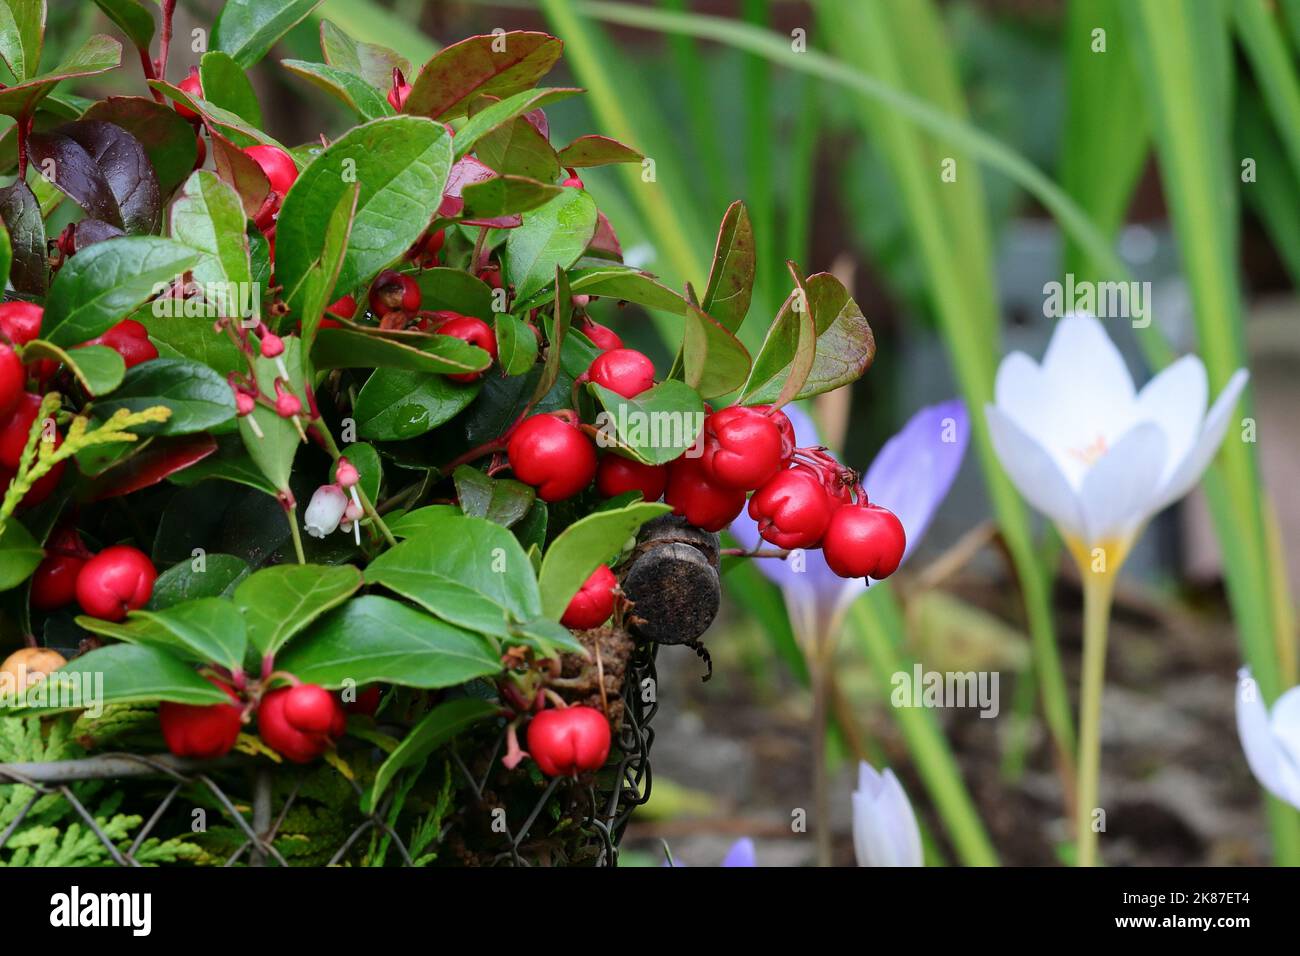 Close-up of the beautiful red fruits of Gaultheria procumbens in a wire basket against a blurry natural background with autumn-flowering crocuses Stock Photo